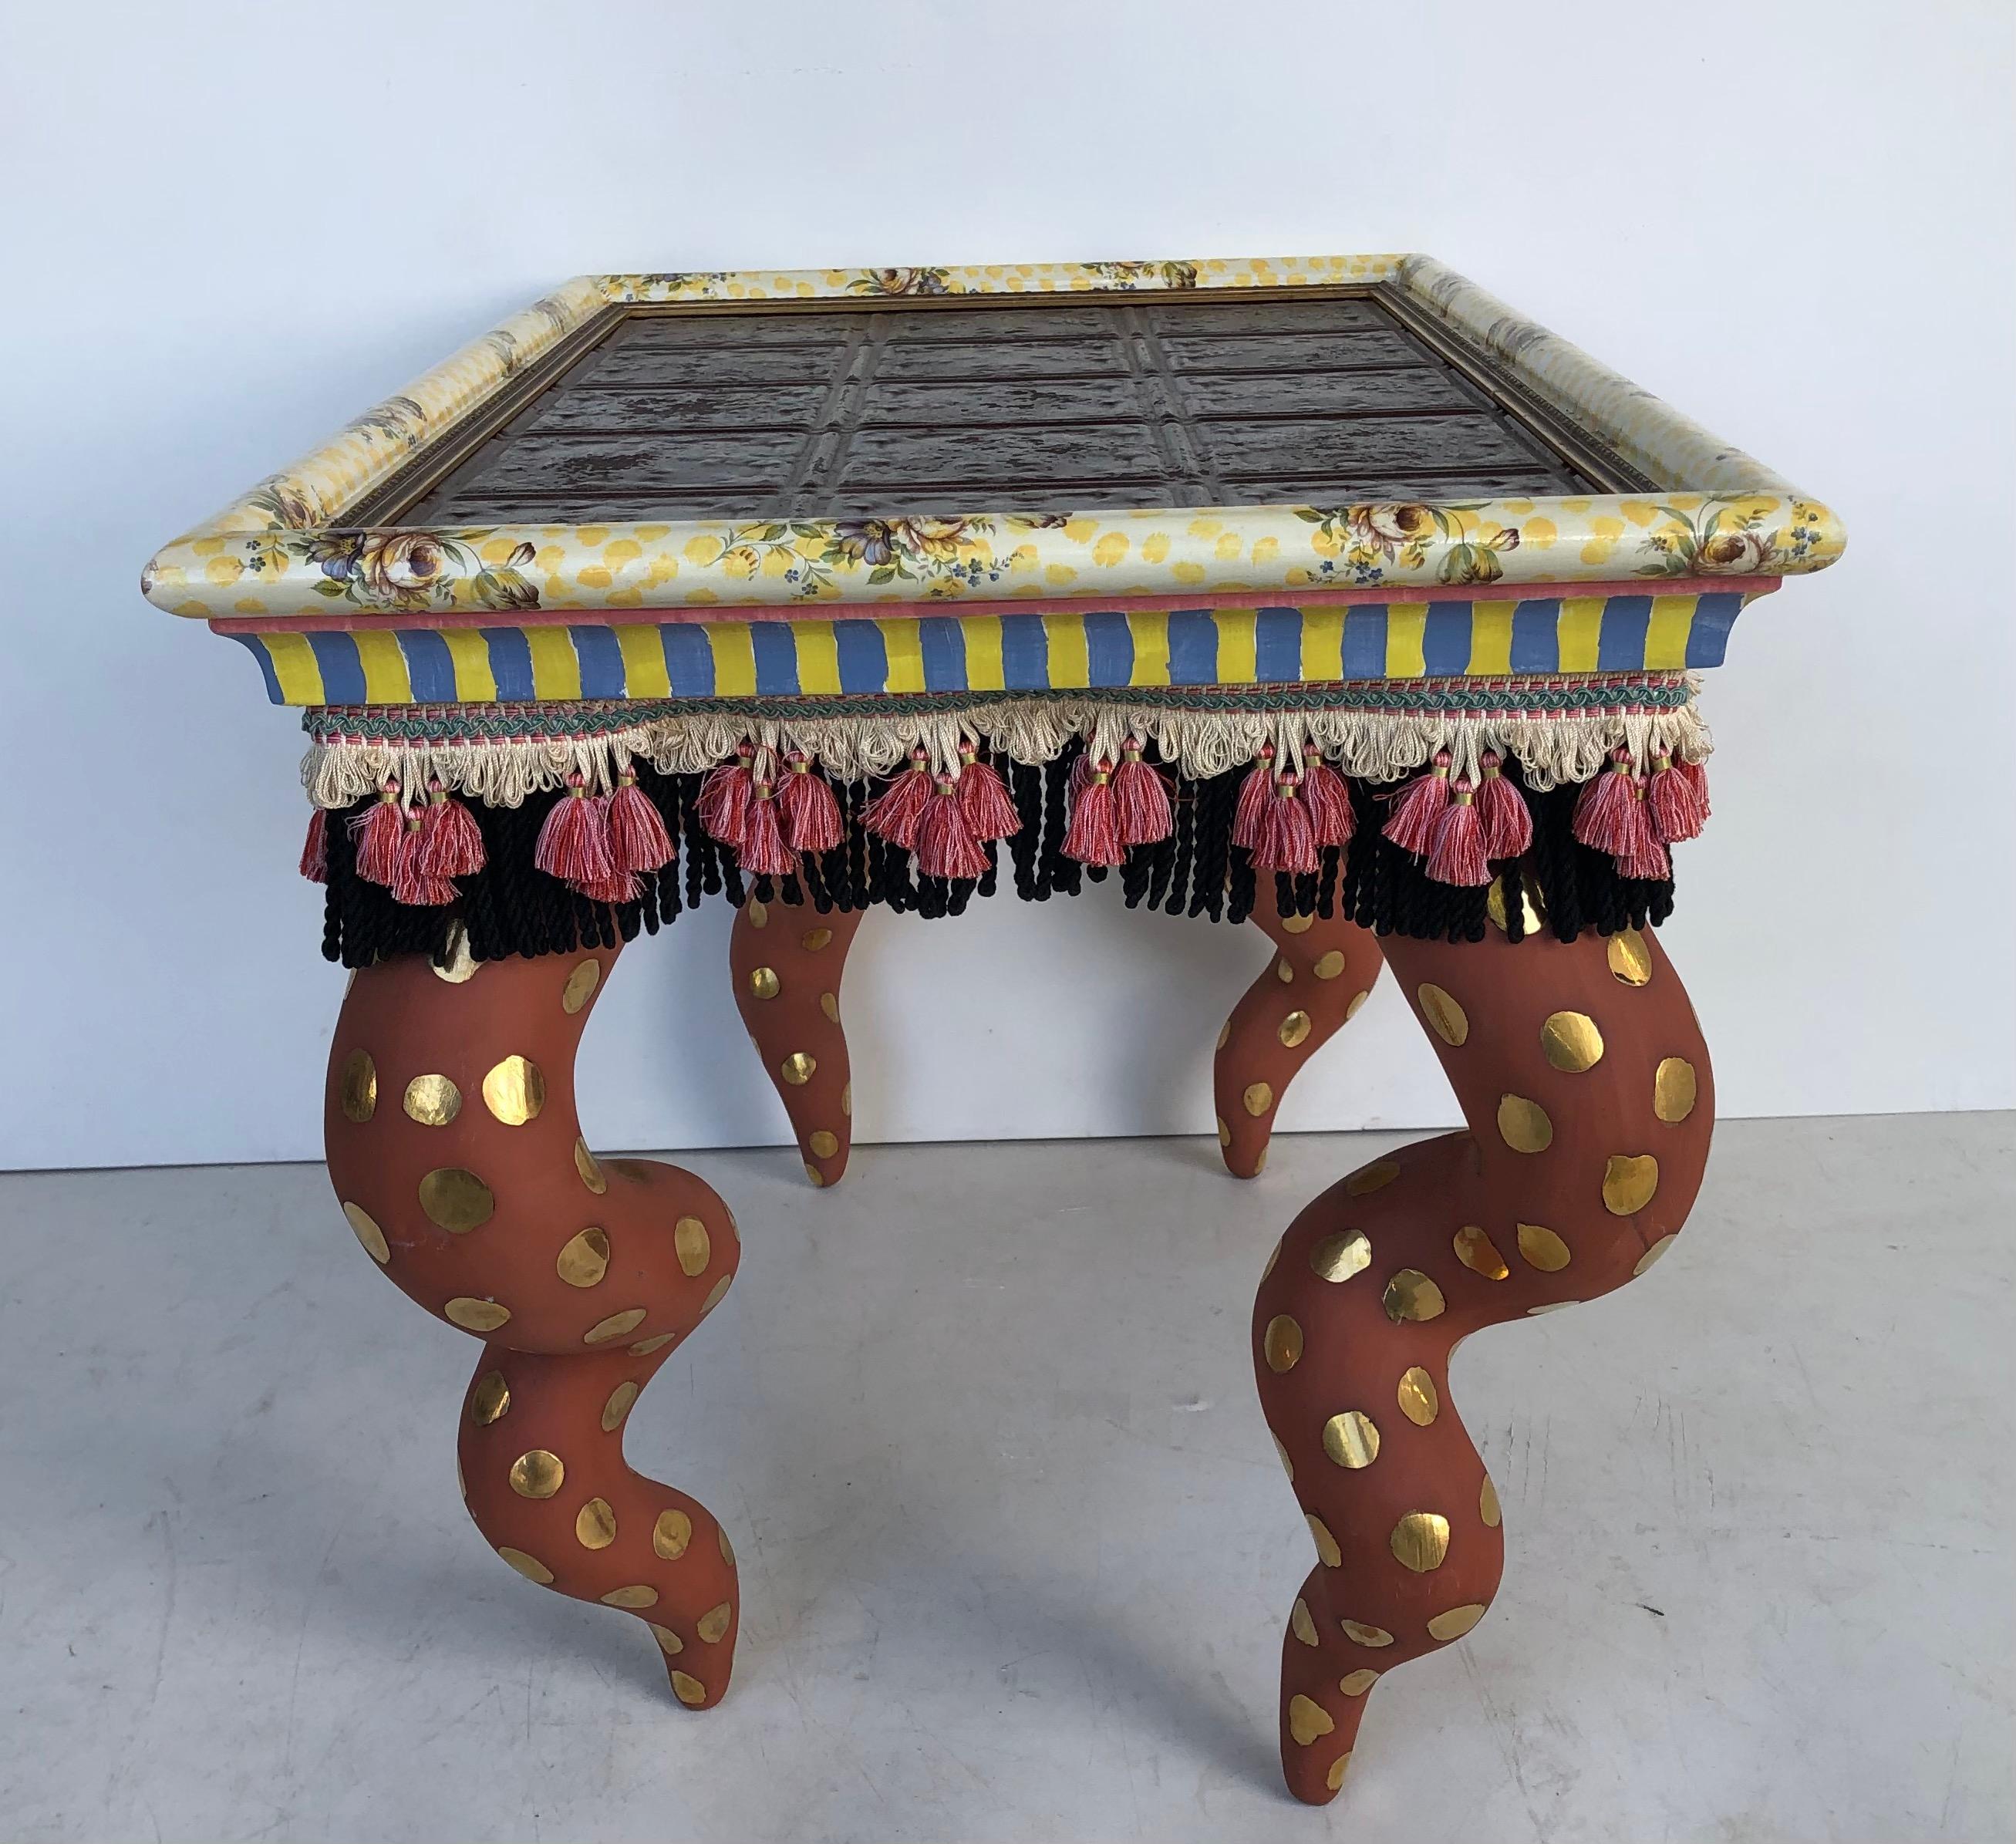 American Mackenzie Childs Painted Ceramic/Wood Coffee Table with Tiles, Tassels, Signed